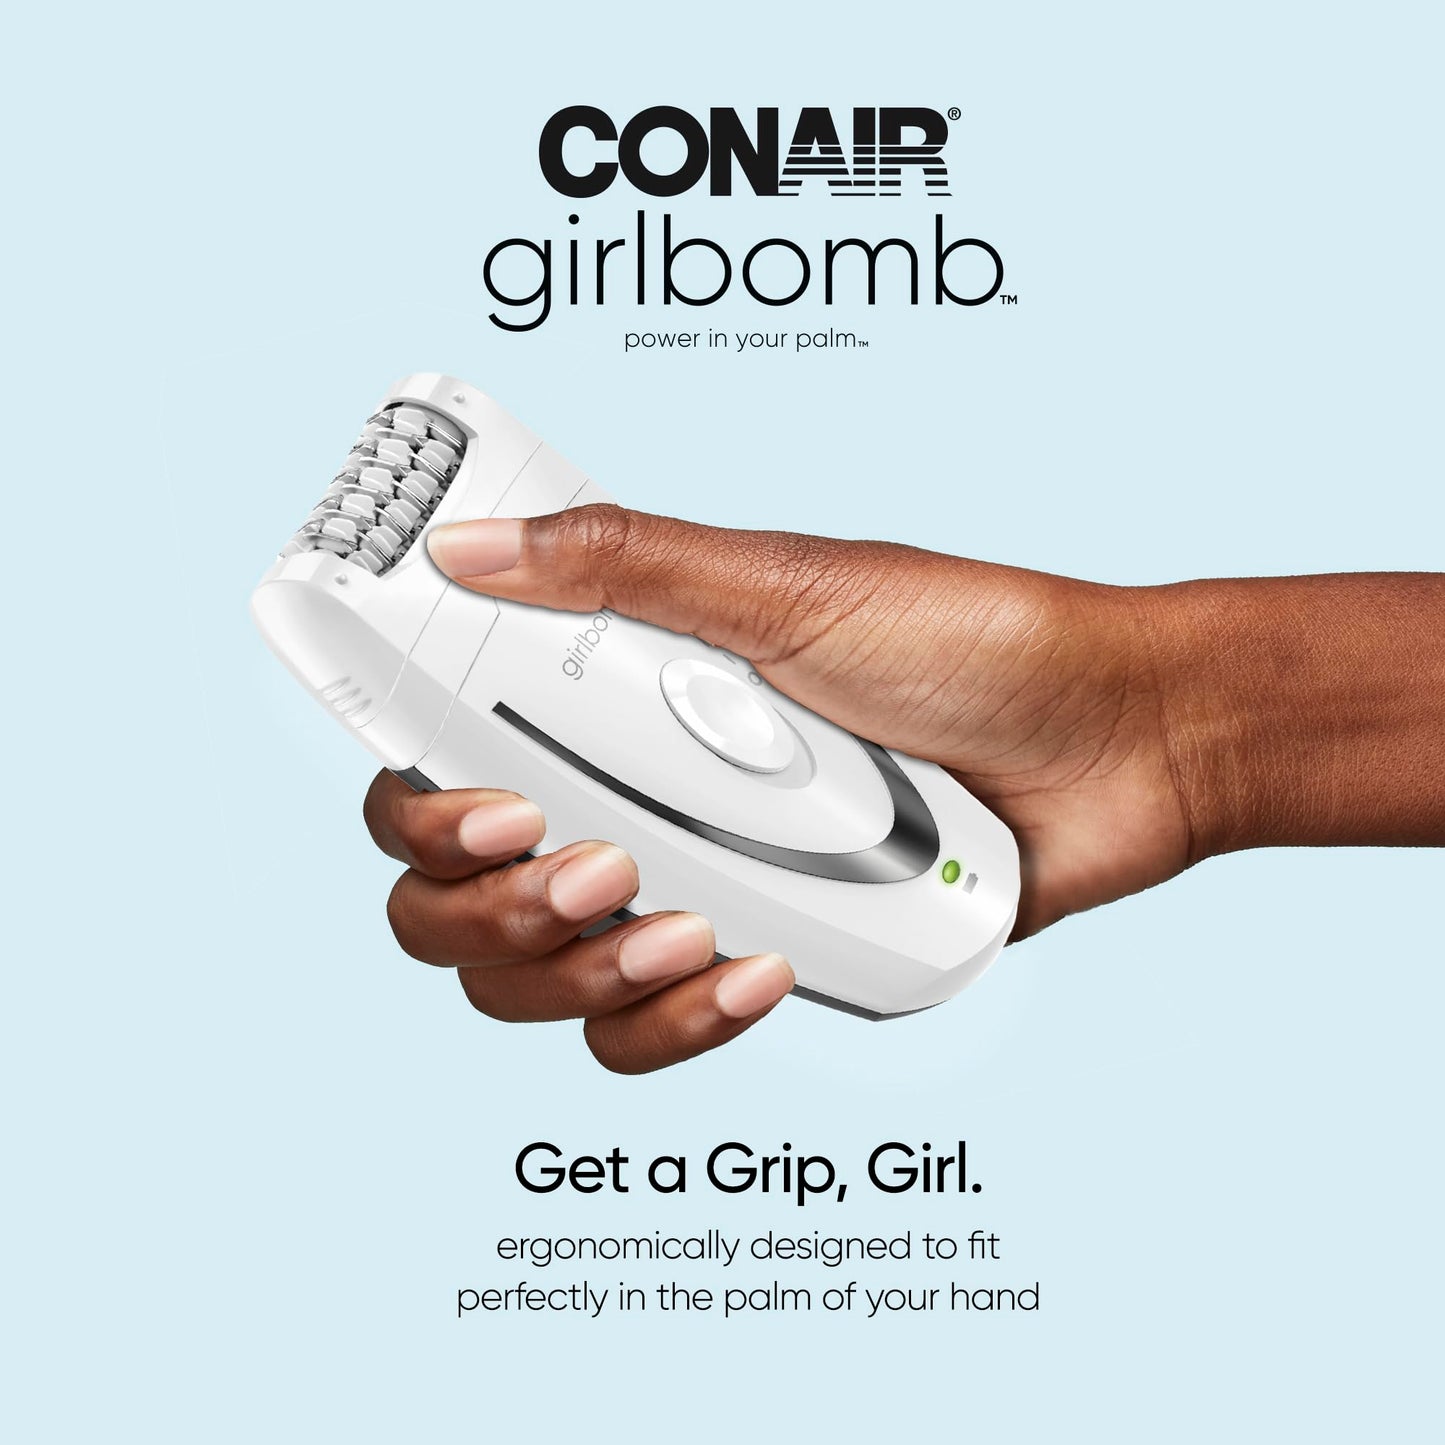 Conair GIRLBOMB Epilator with Ice Roller for Smooth and Soft Skin, Hair Removal Device, Epilator for Women, Women’s Shaver & Trimmer, 3-Piece Kit with Ice Roller Attachment, Cordless/Rechargeable